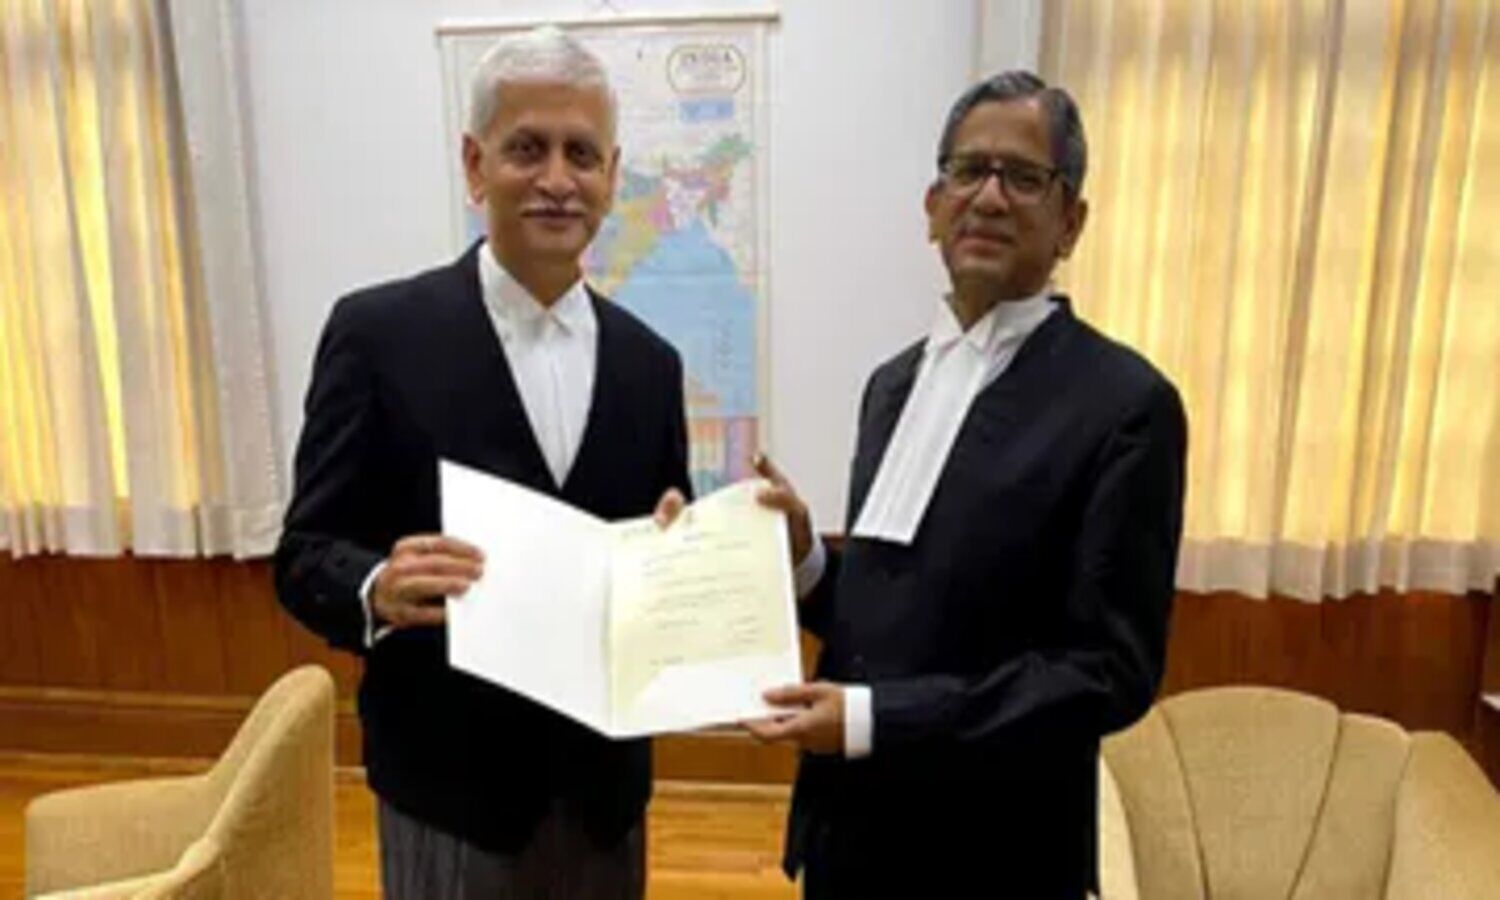 New CJI: Justice UU Lalit will be the next Chief Justice of the country, the current CJI NV Raman recommended